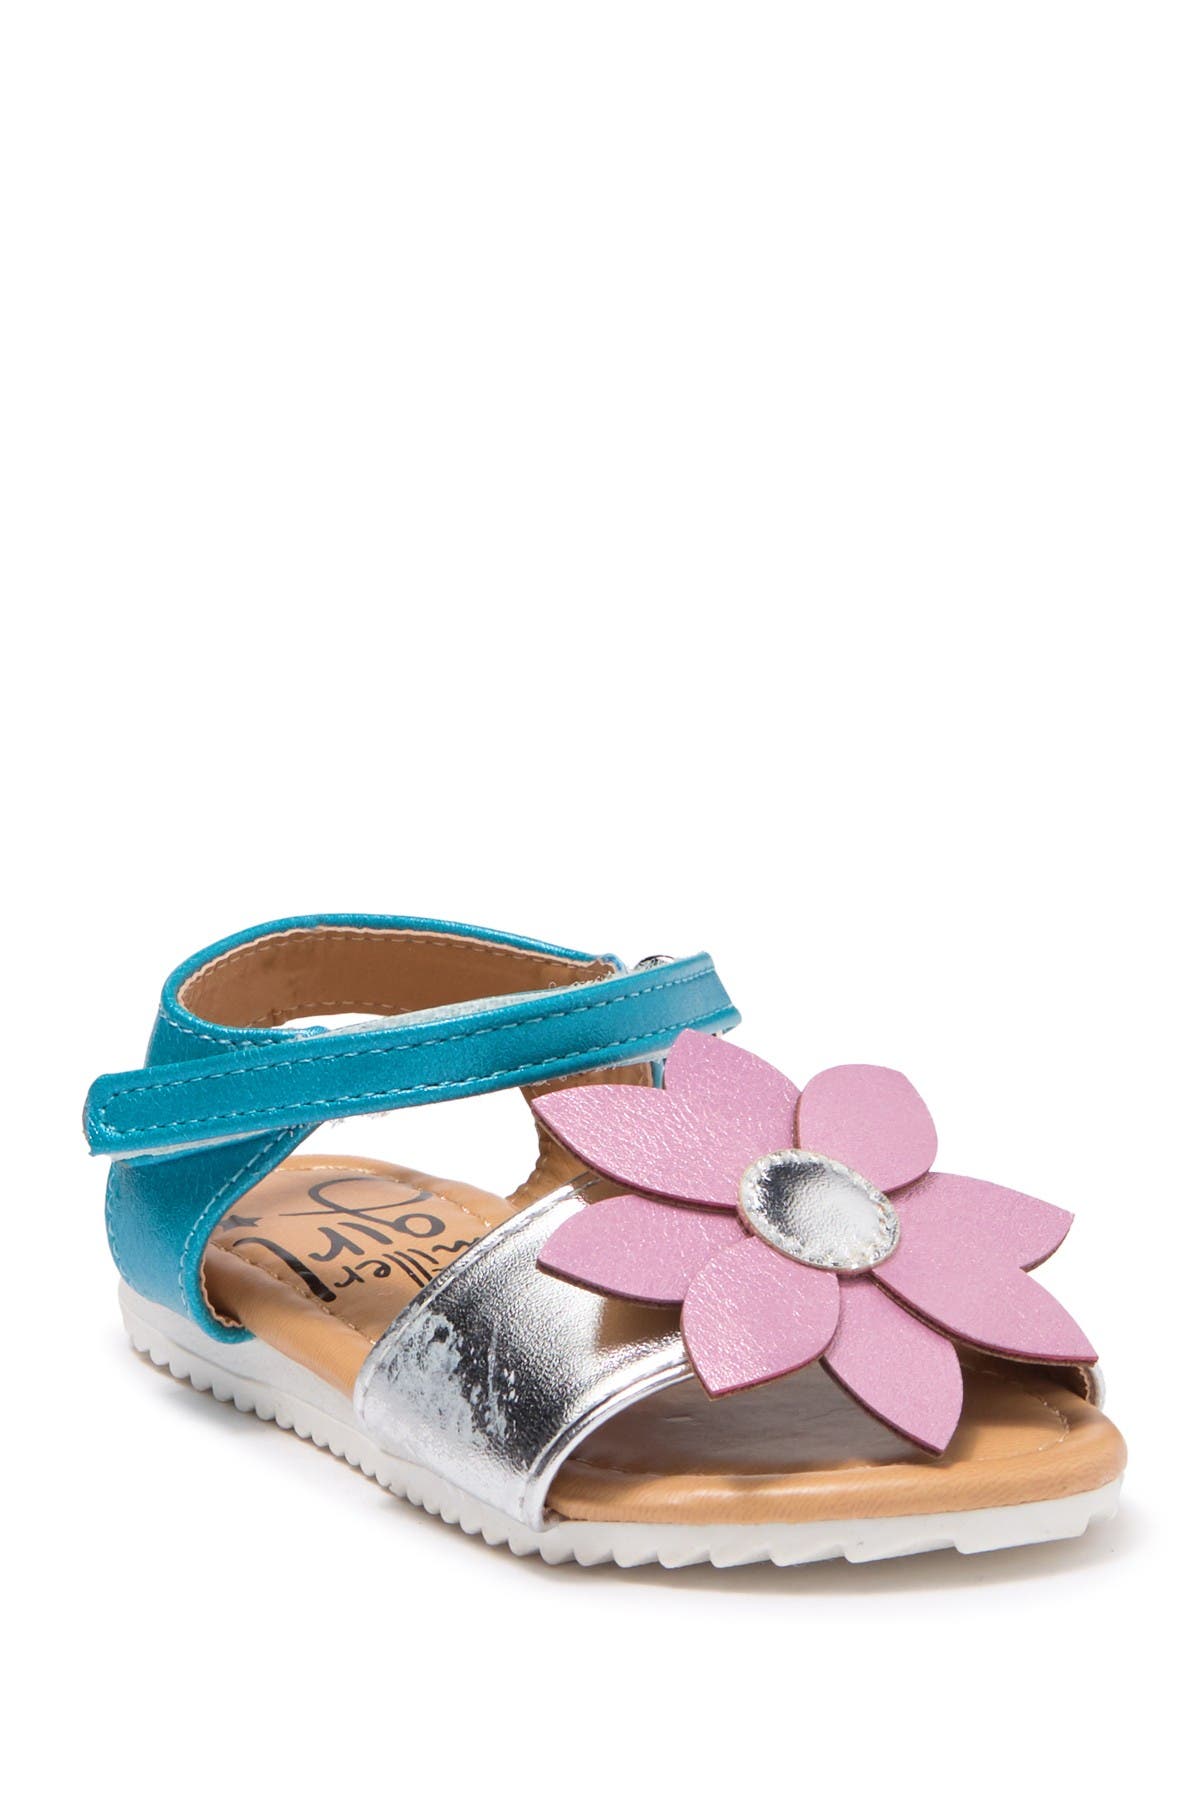 sunflower sandals for toddlers